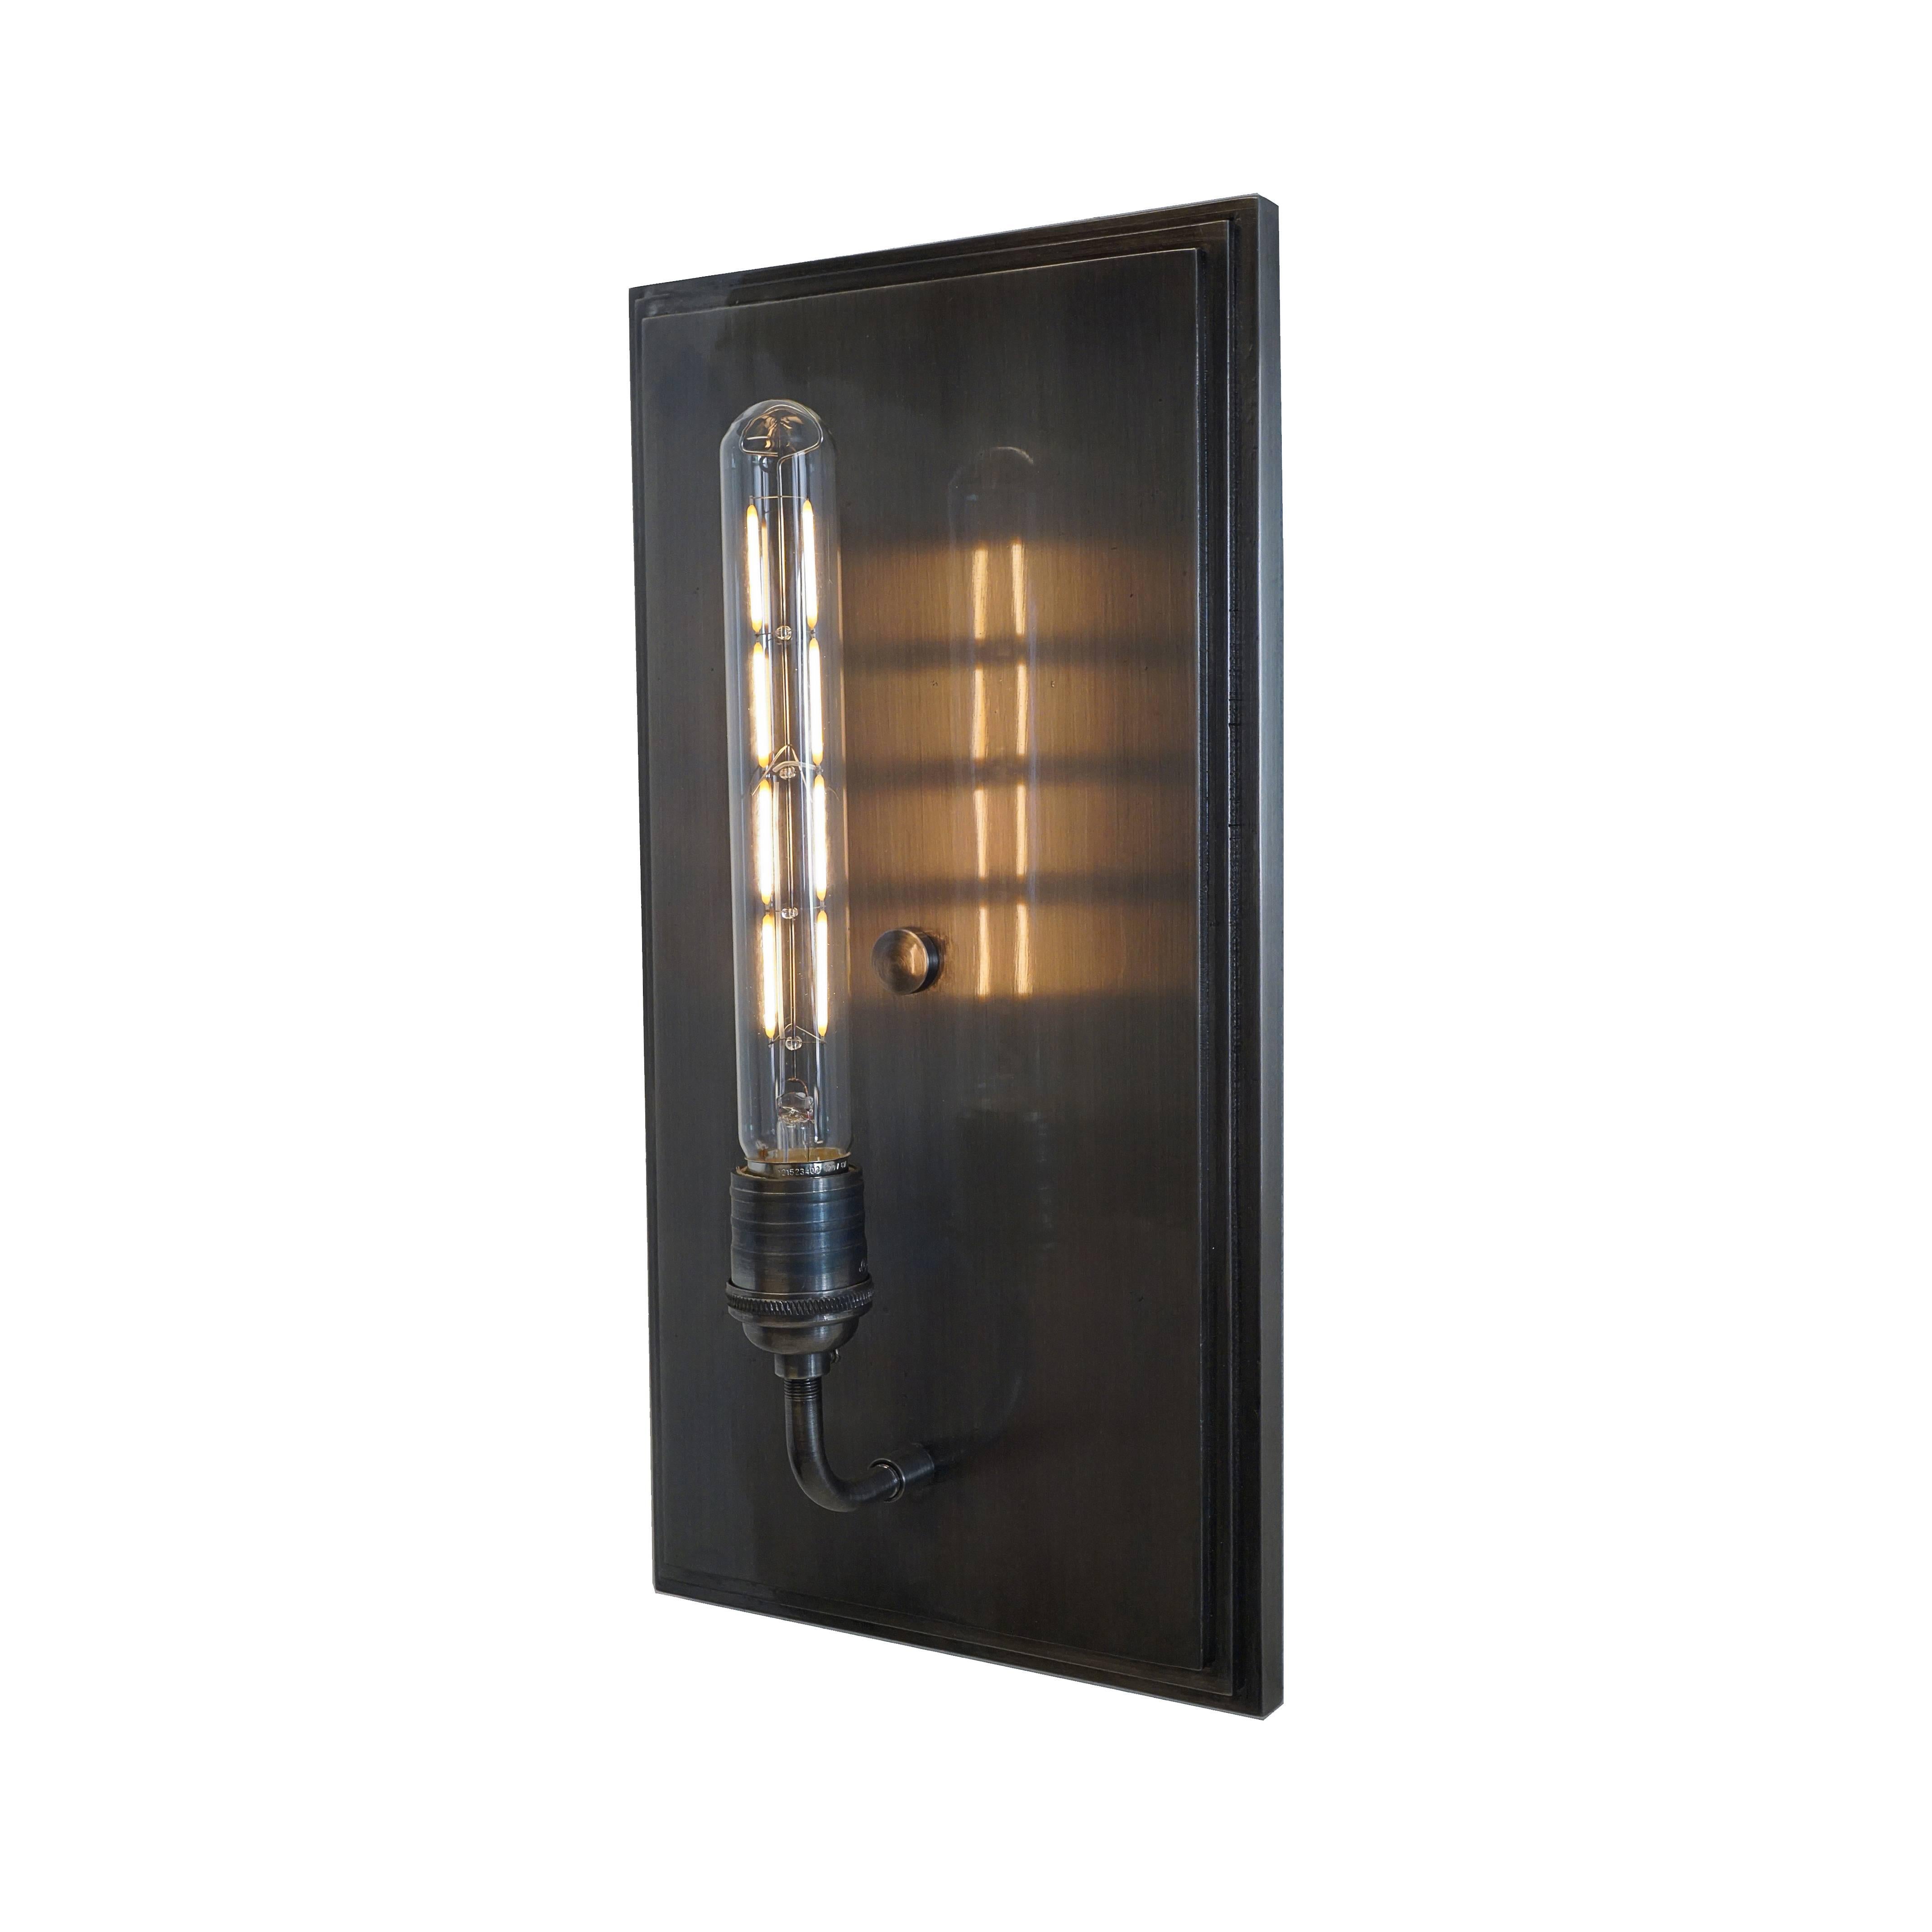 Forthright in its Art Deco inspired step design with clean lines and contemporary styling, this is an elegant interior sconce that is sure to be revered as a piece of art in any room.

Fixture shown in SBLC Pewter finish.

Hand-forged in heavy gauge